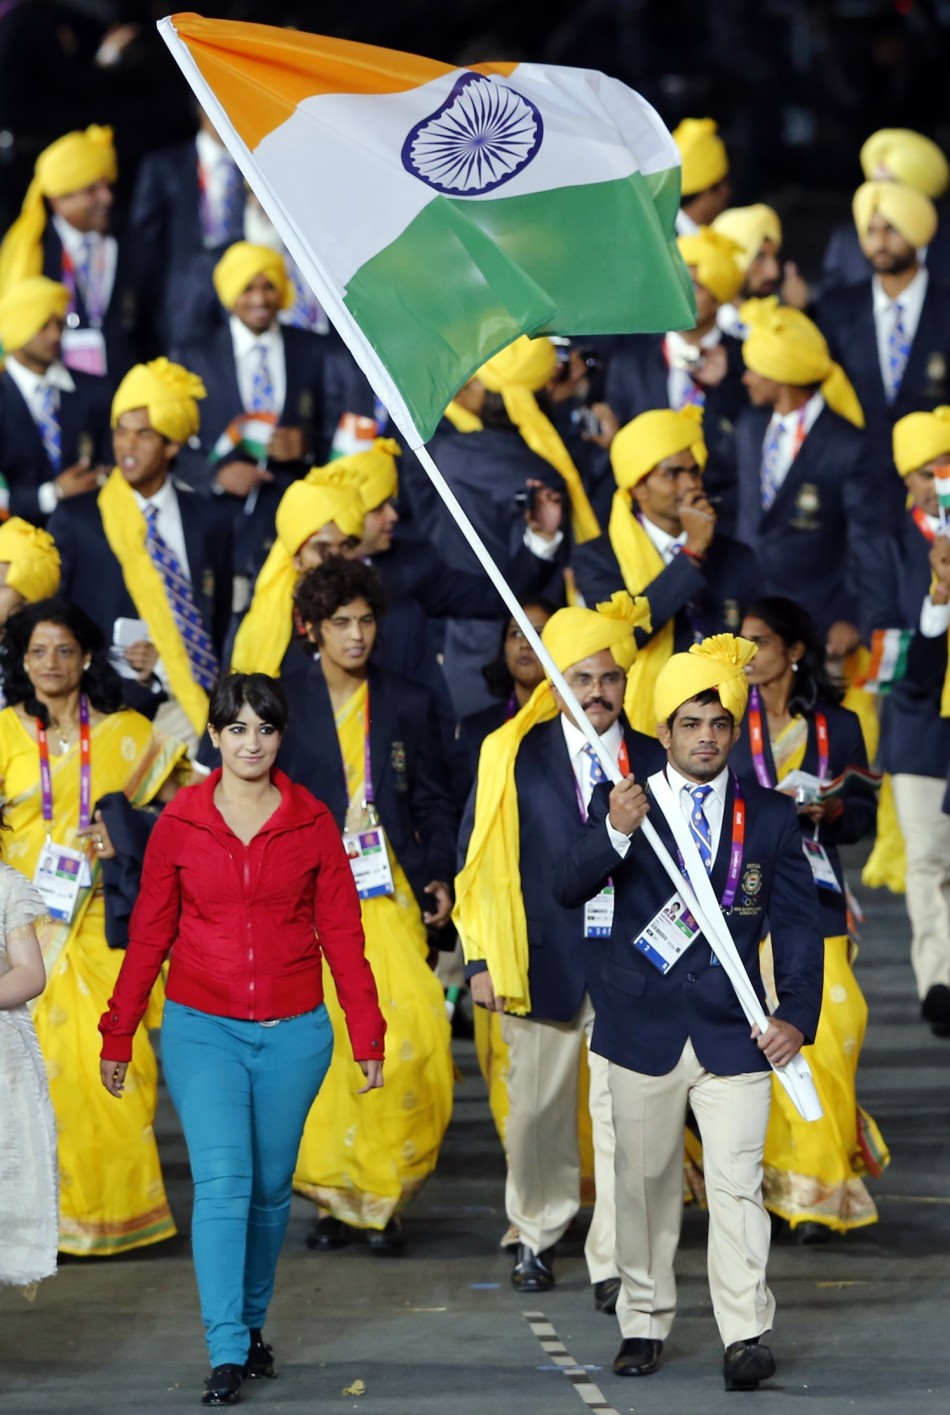 Mystery Woman at the Indian Contingent